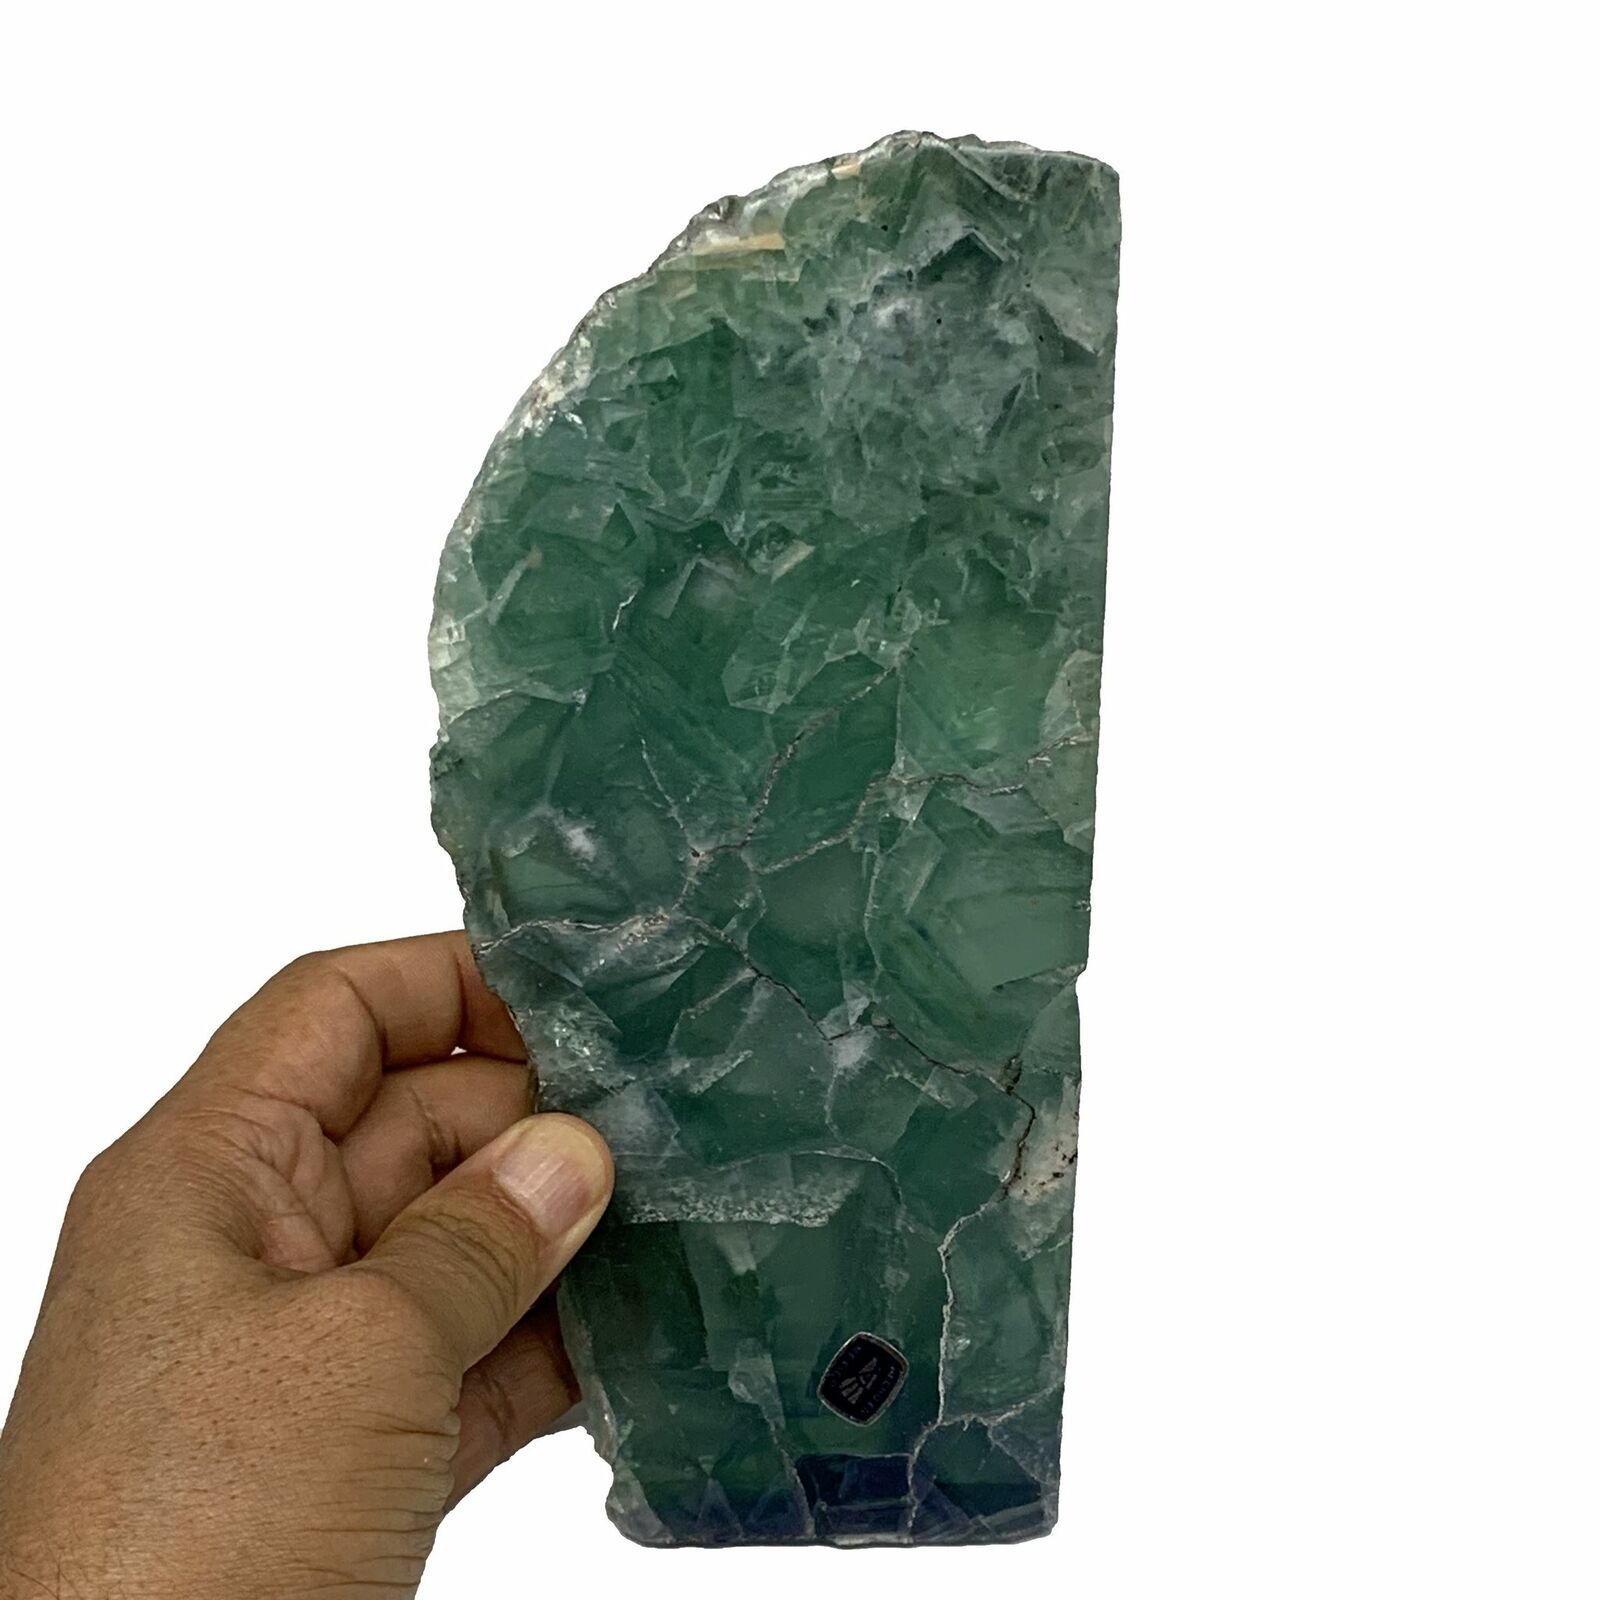 Primary image for 970g, 7.8"x3.7"x1.1", Natural Untreated Fluorite Slab Crystal @Mexico, B18622